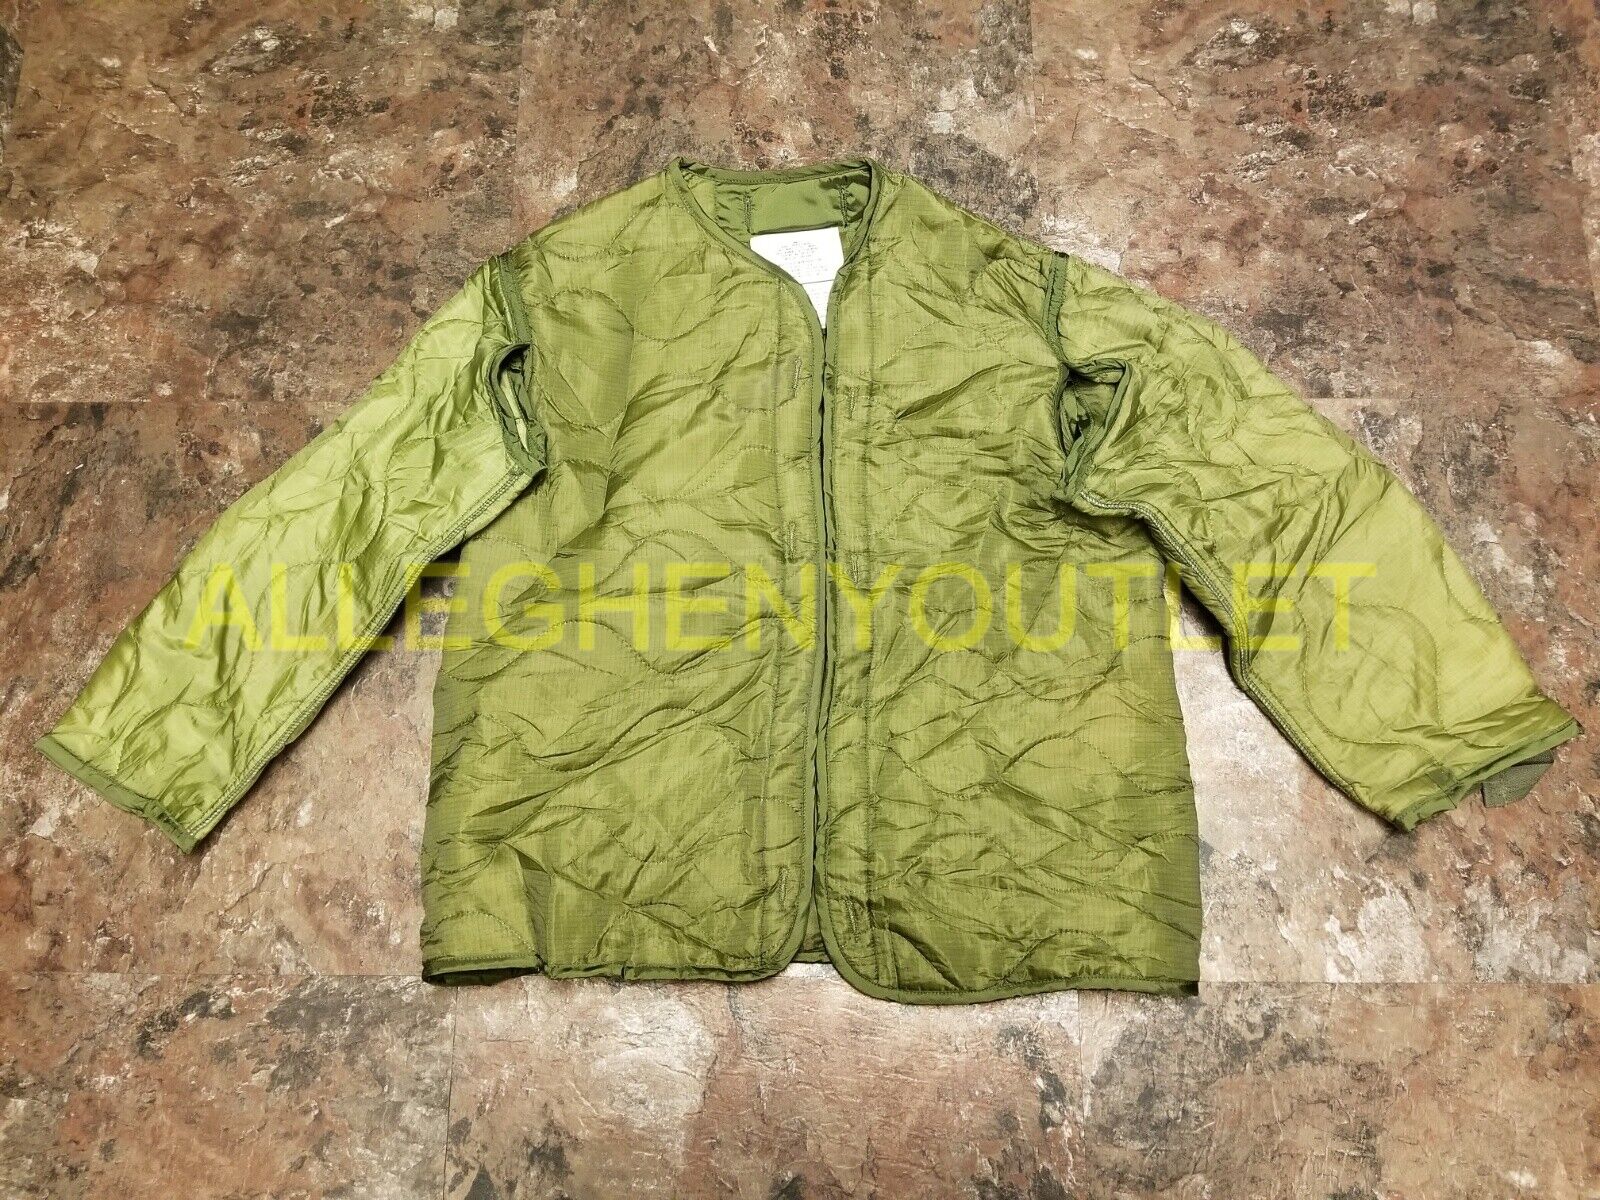 US Army Military M-65 FIELD JACKET QUILTED COAT LINER OD Green Size Small NEW